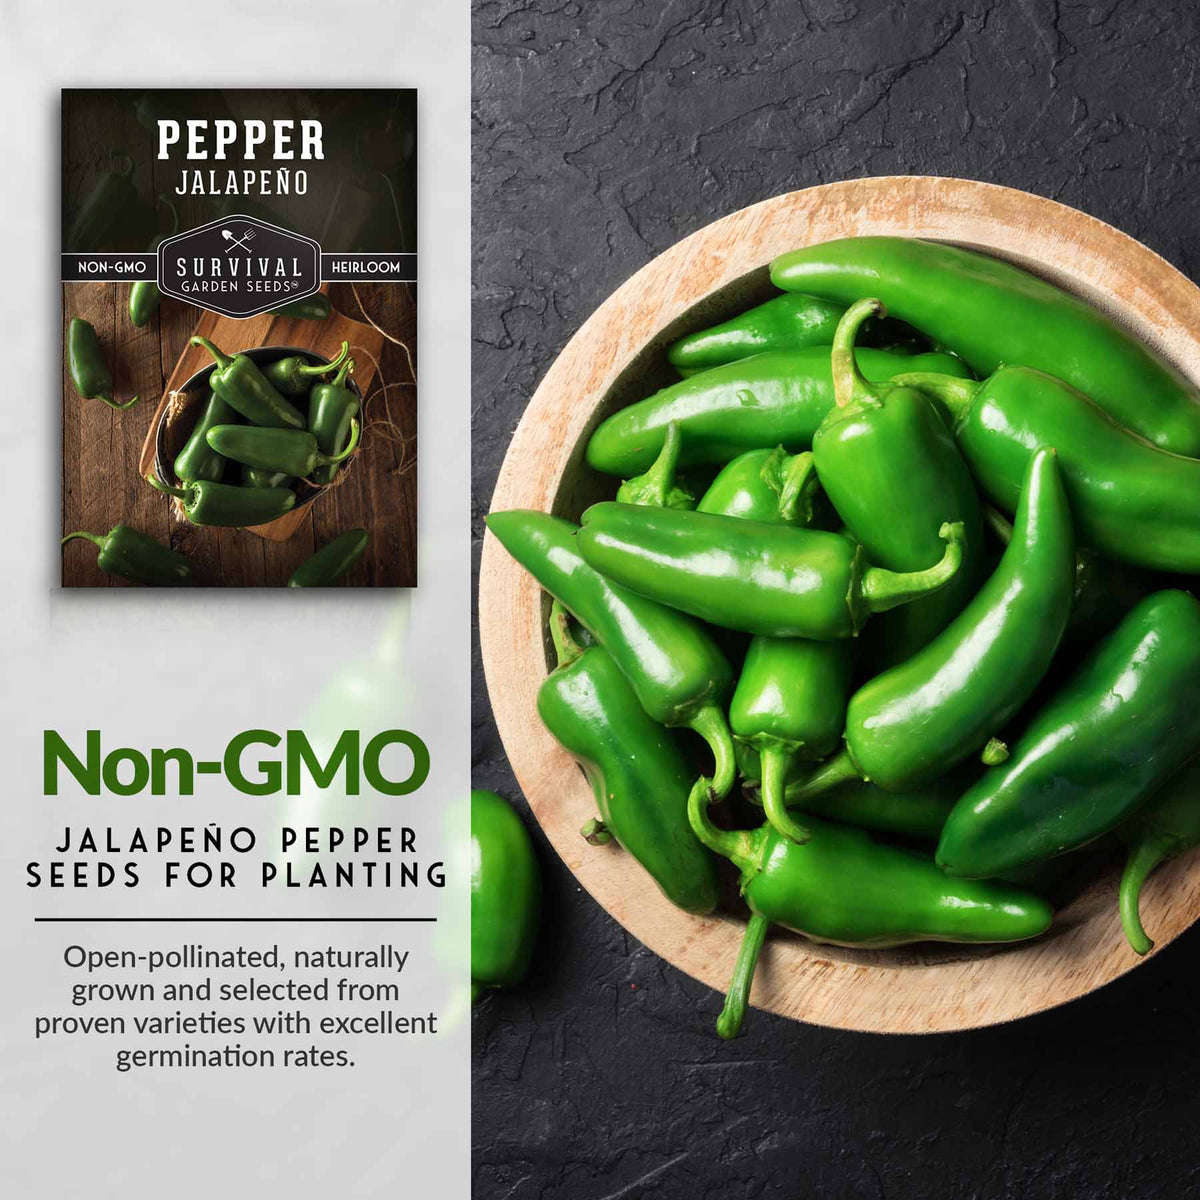 Non-GMO jalapeno pepper seeds for planting